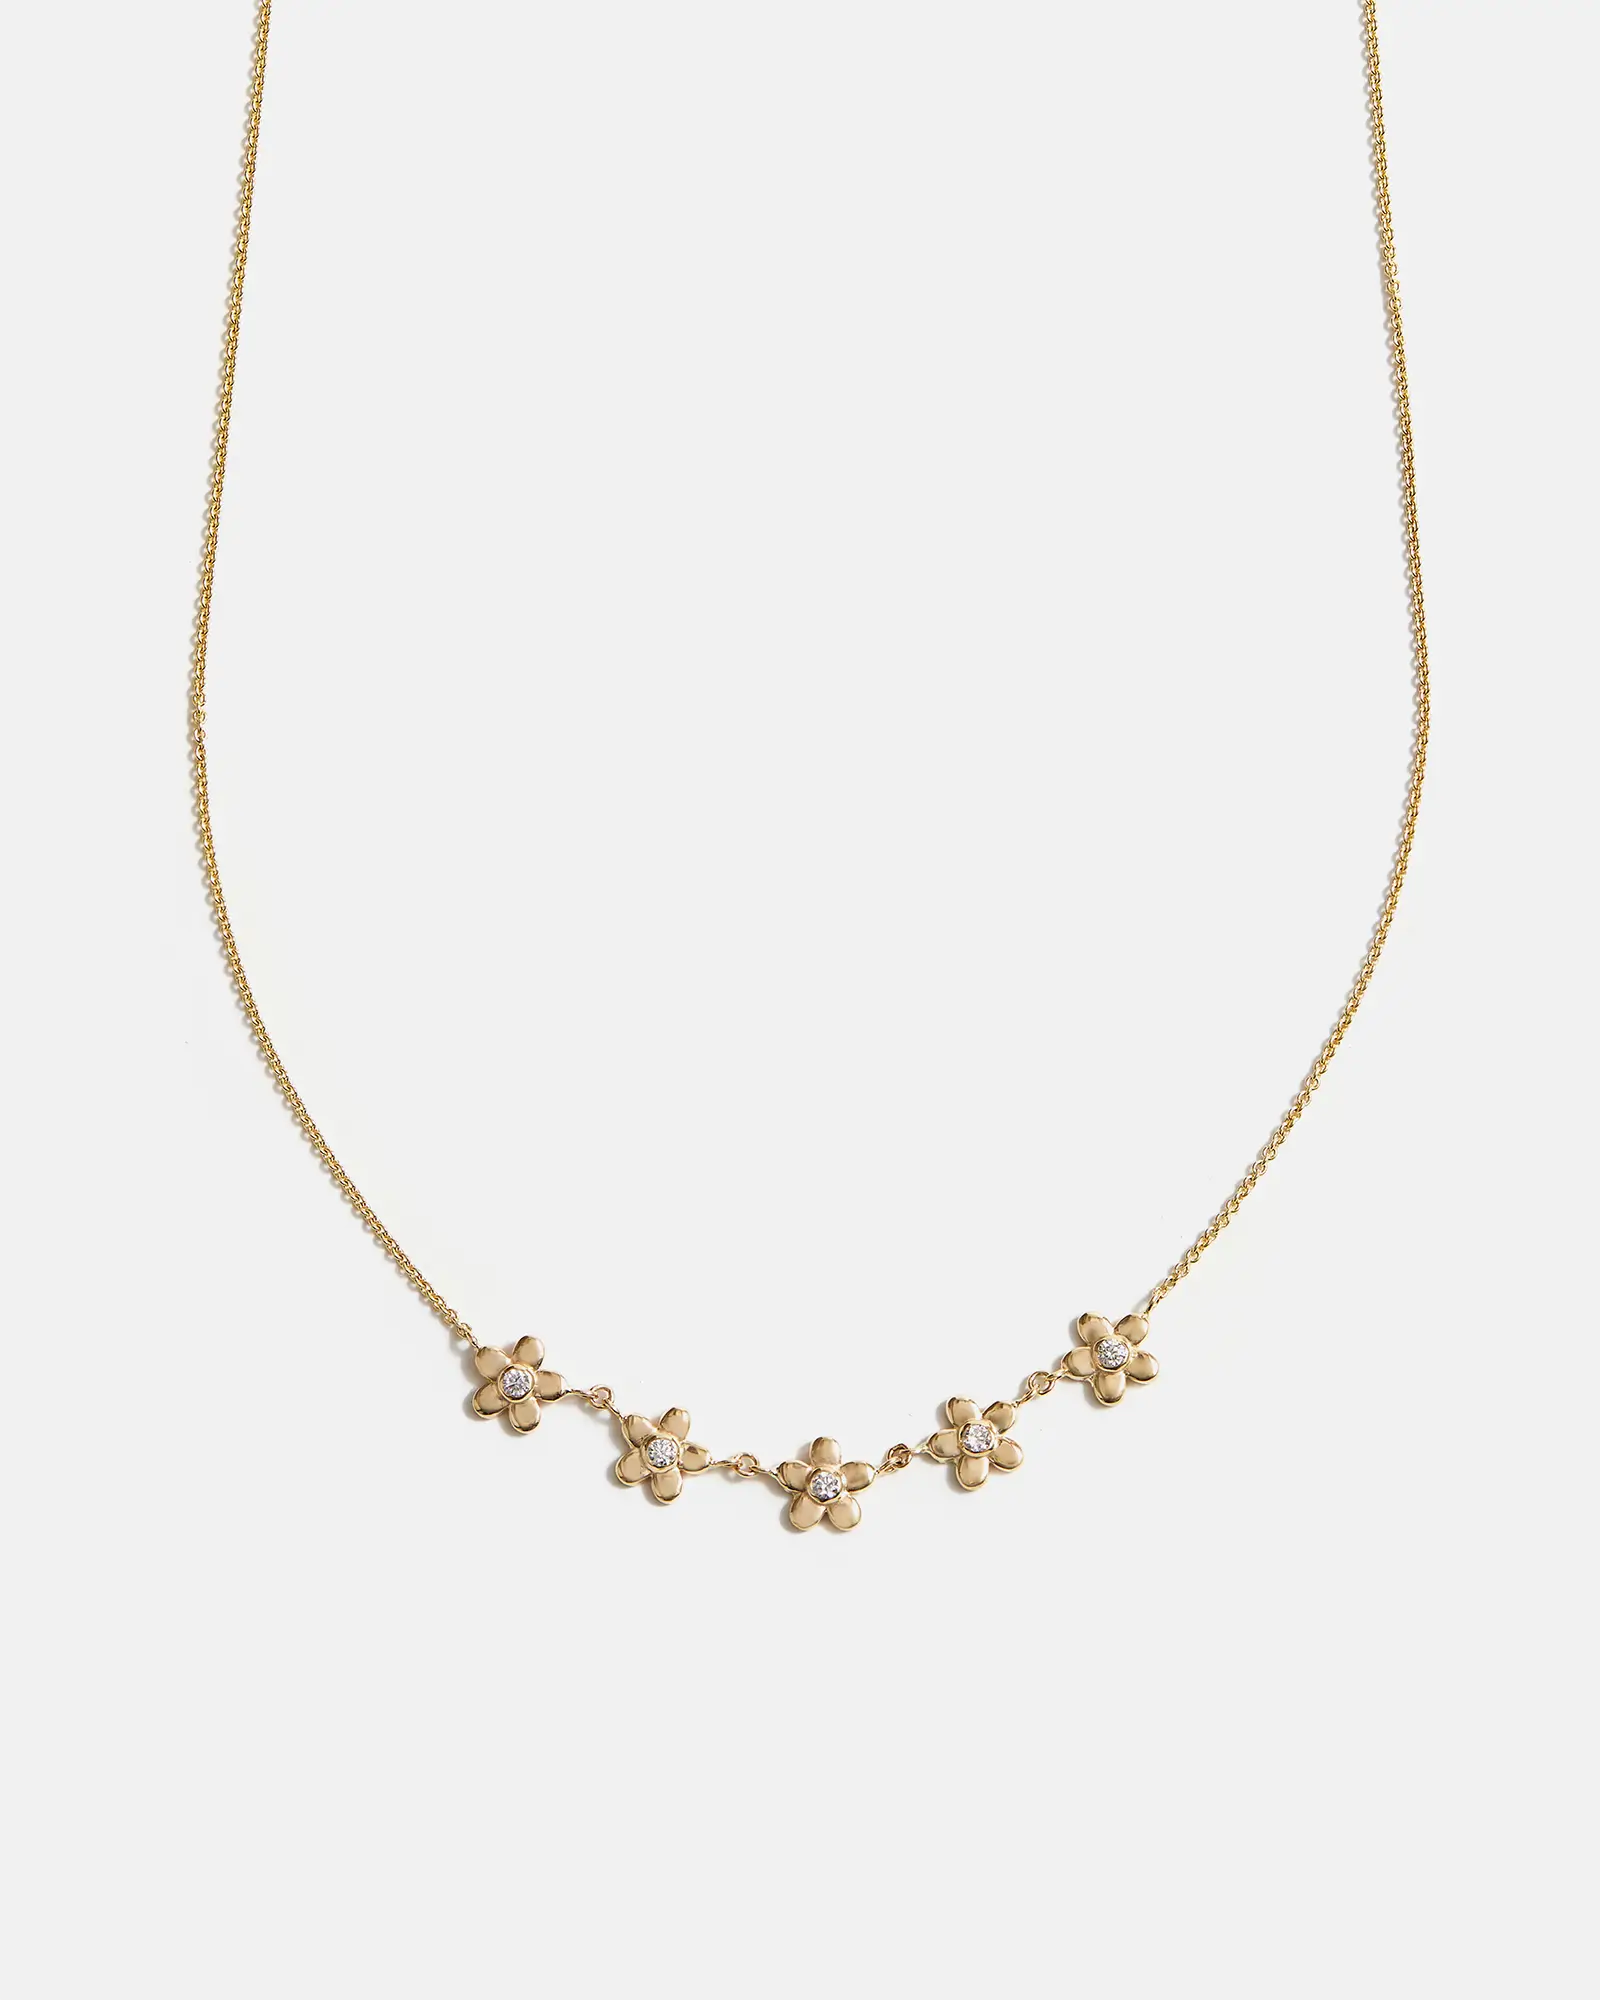 Daisy Necklace in Yellow Gold with lab grown Diamonds